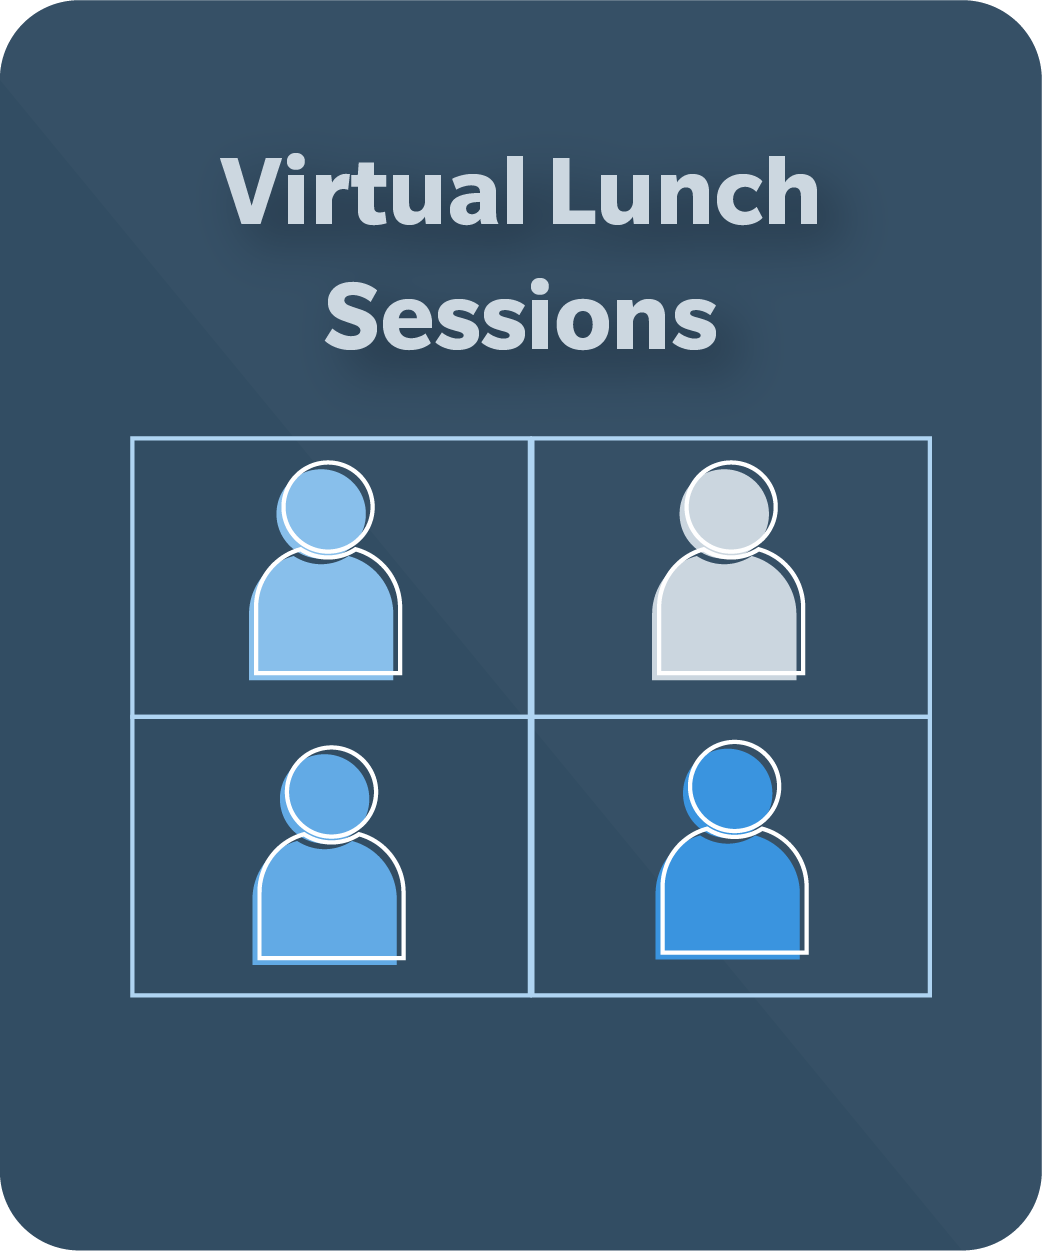 Virtual Lunch Sessions, Zoom icons